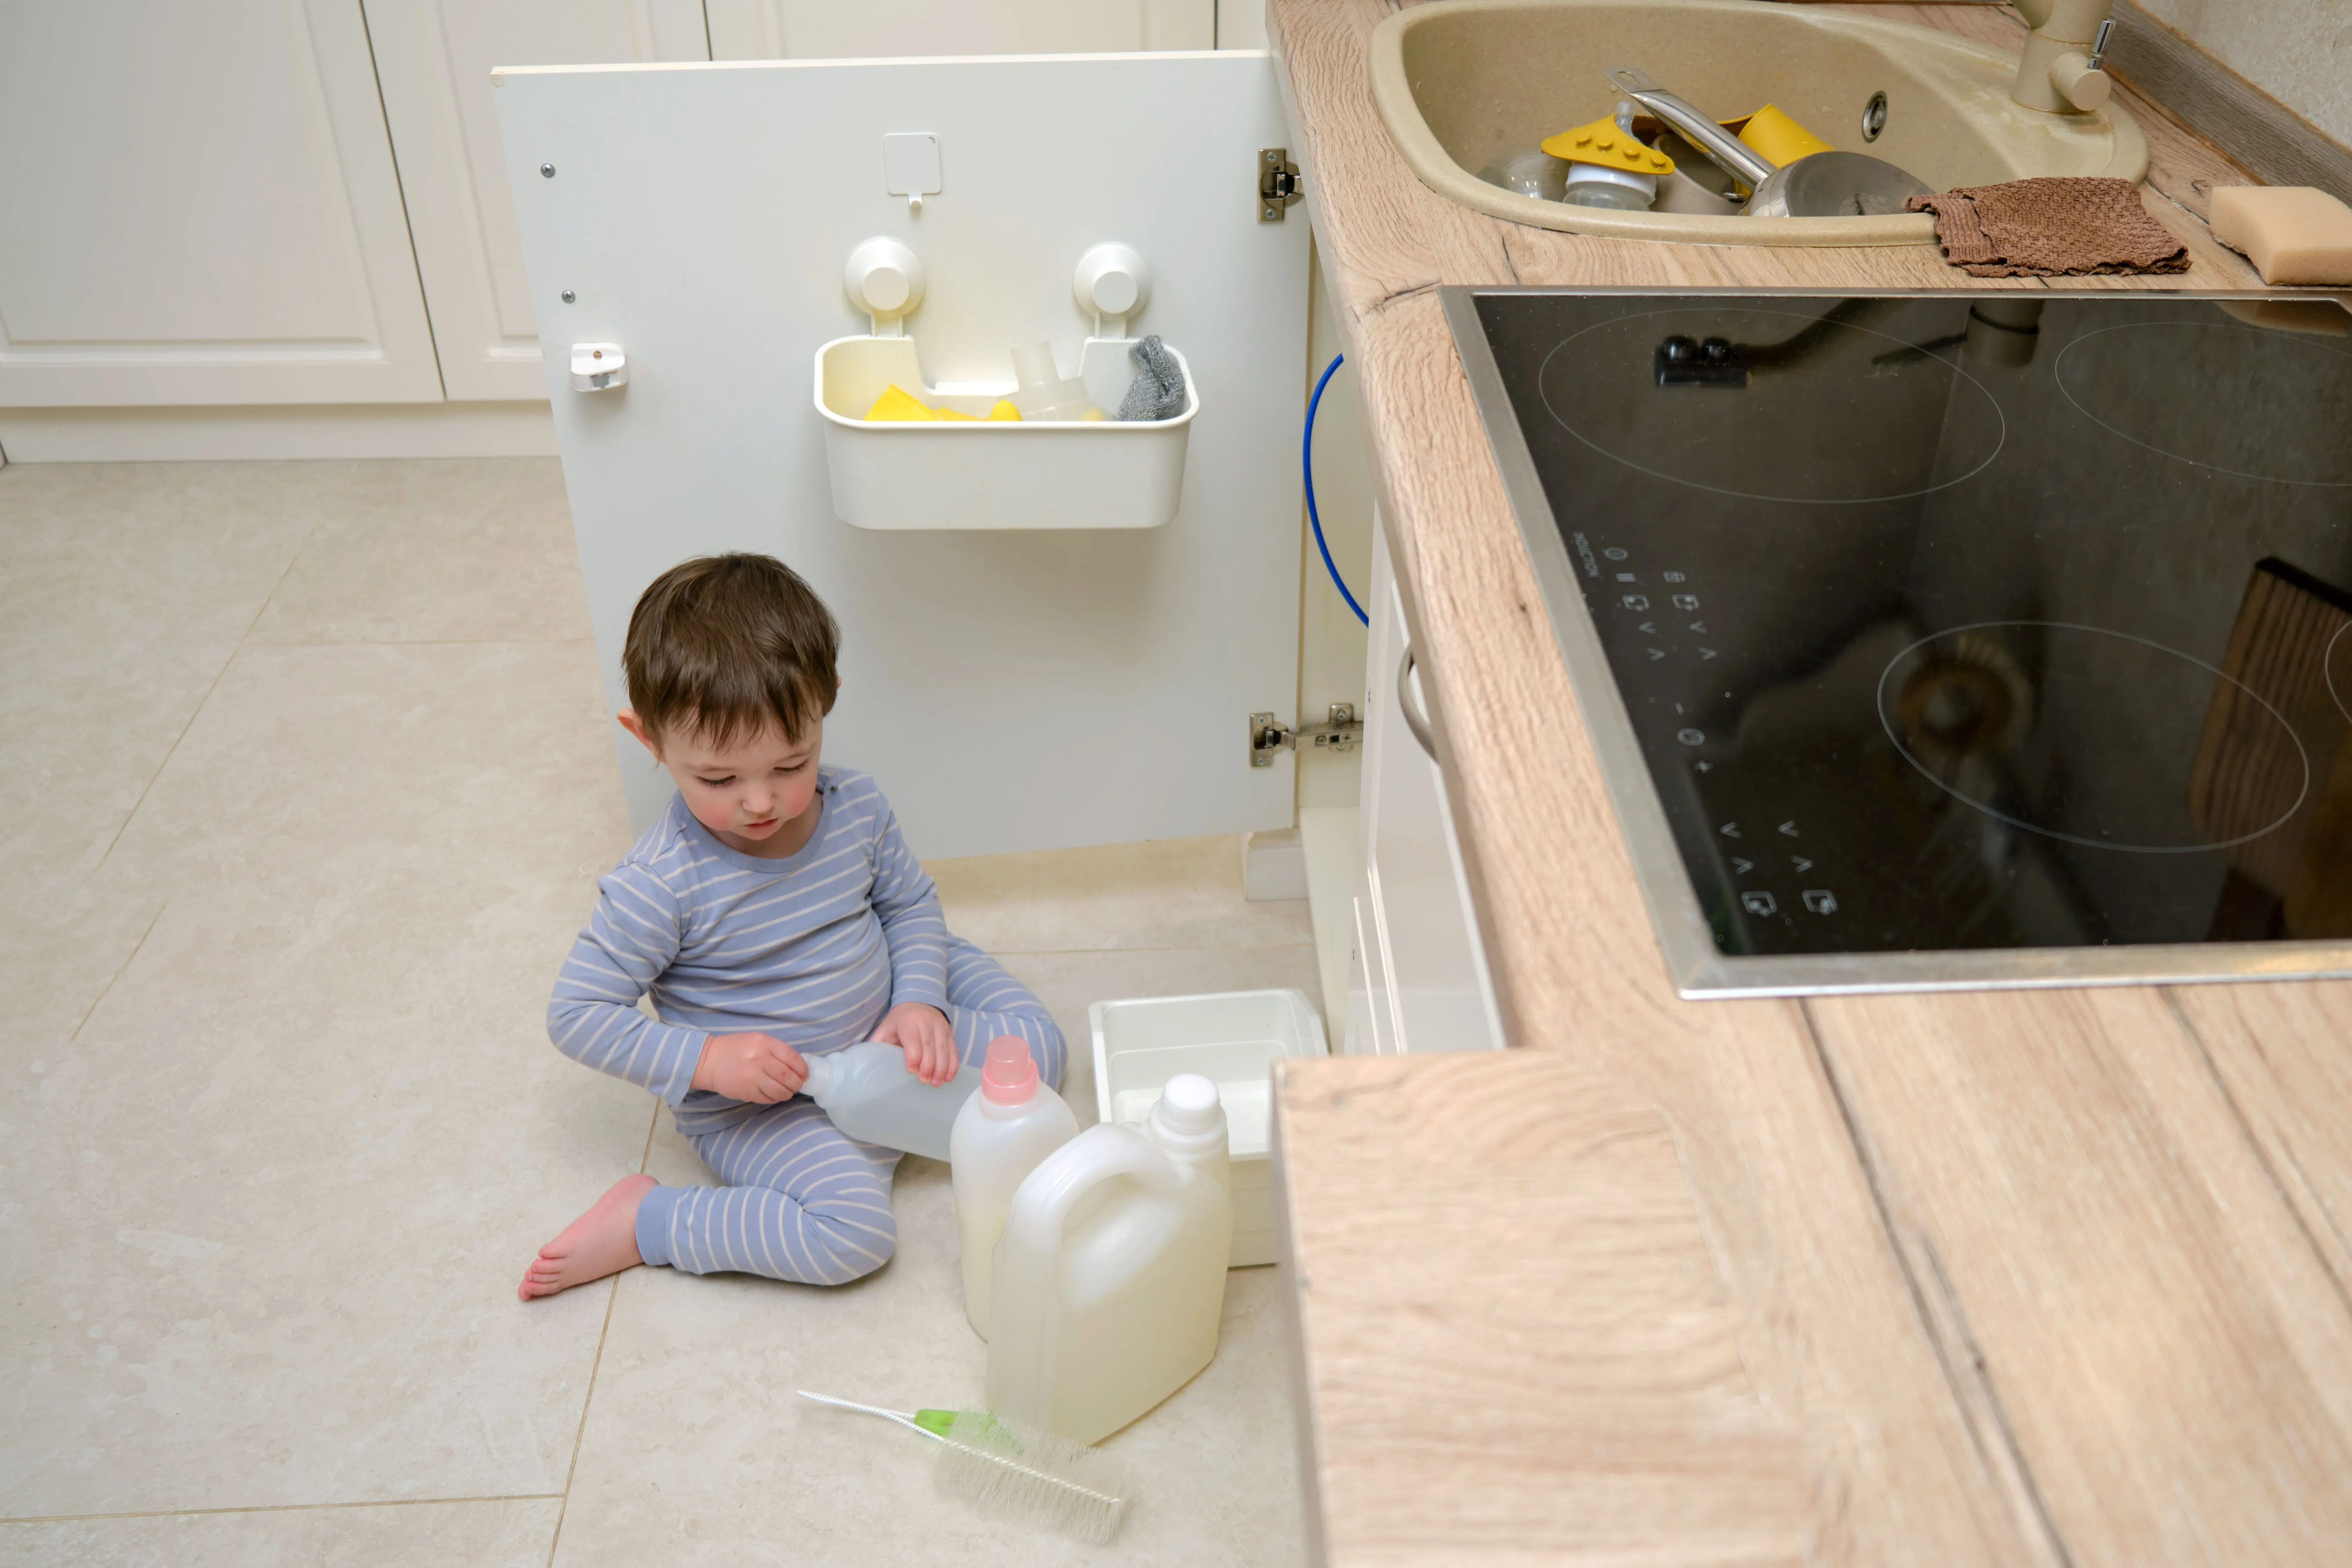 A No-Nonsense Guide to Babyproofing Your Home